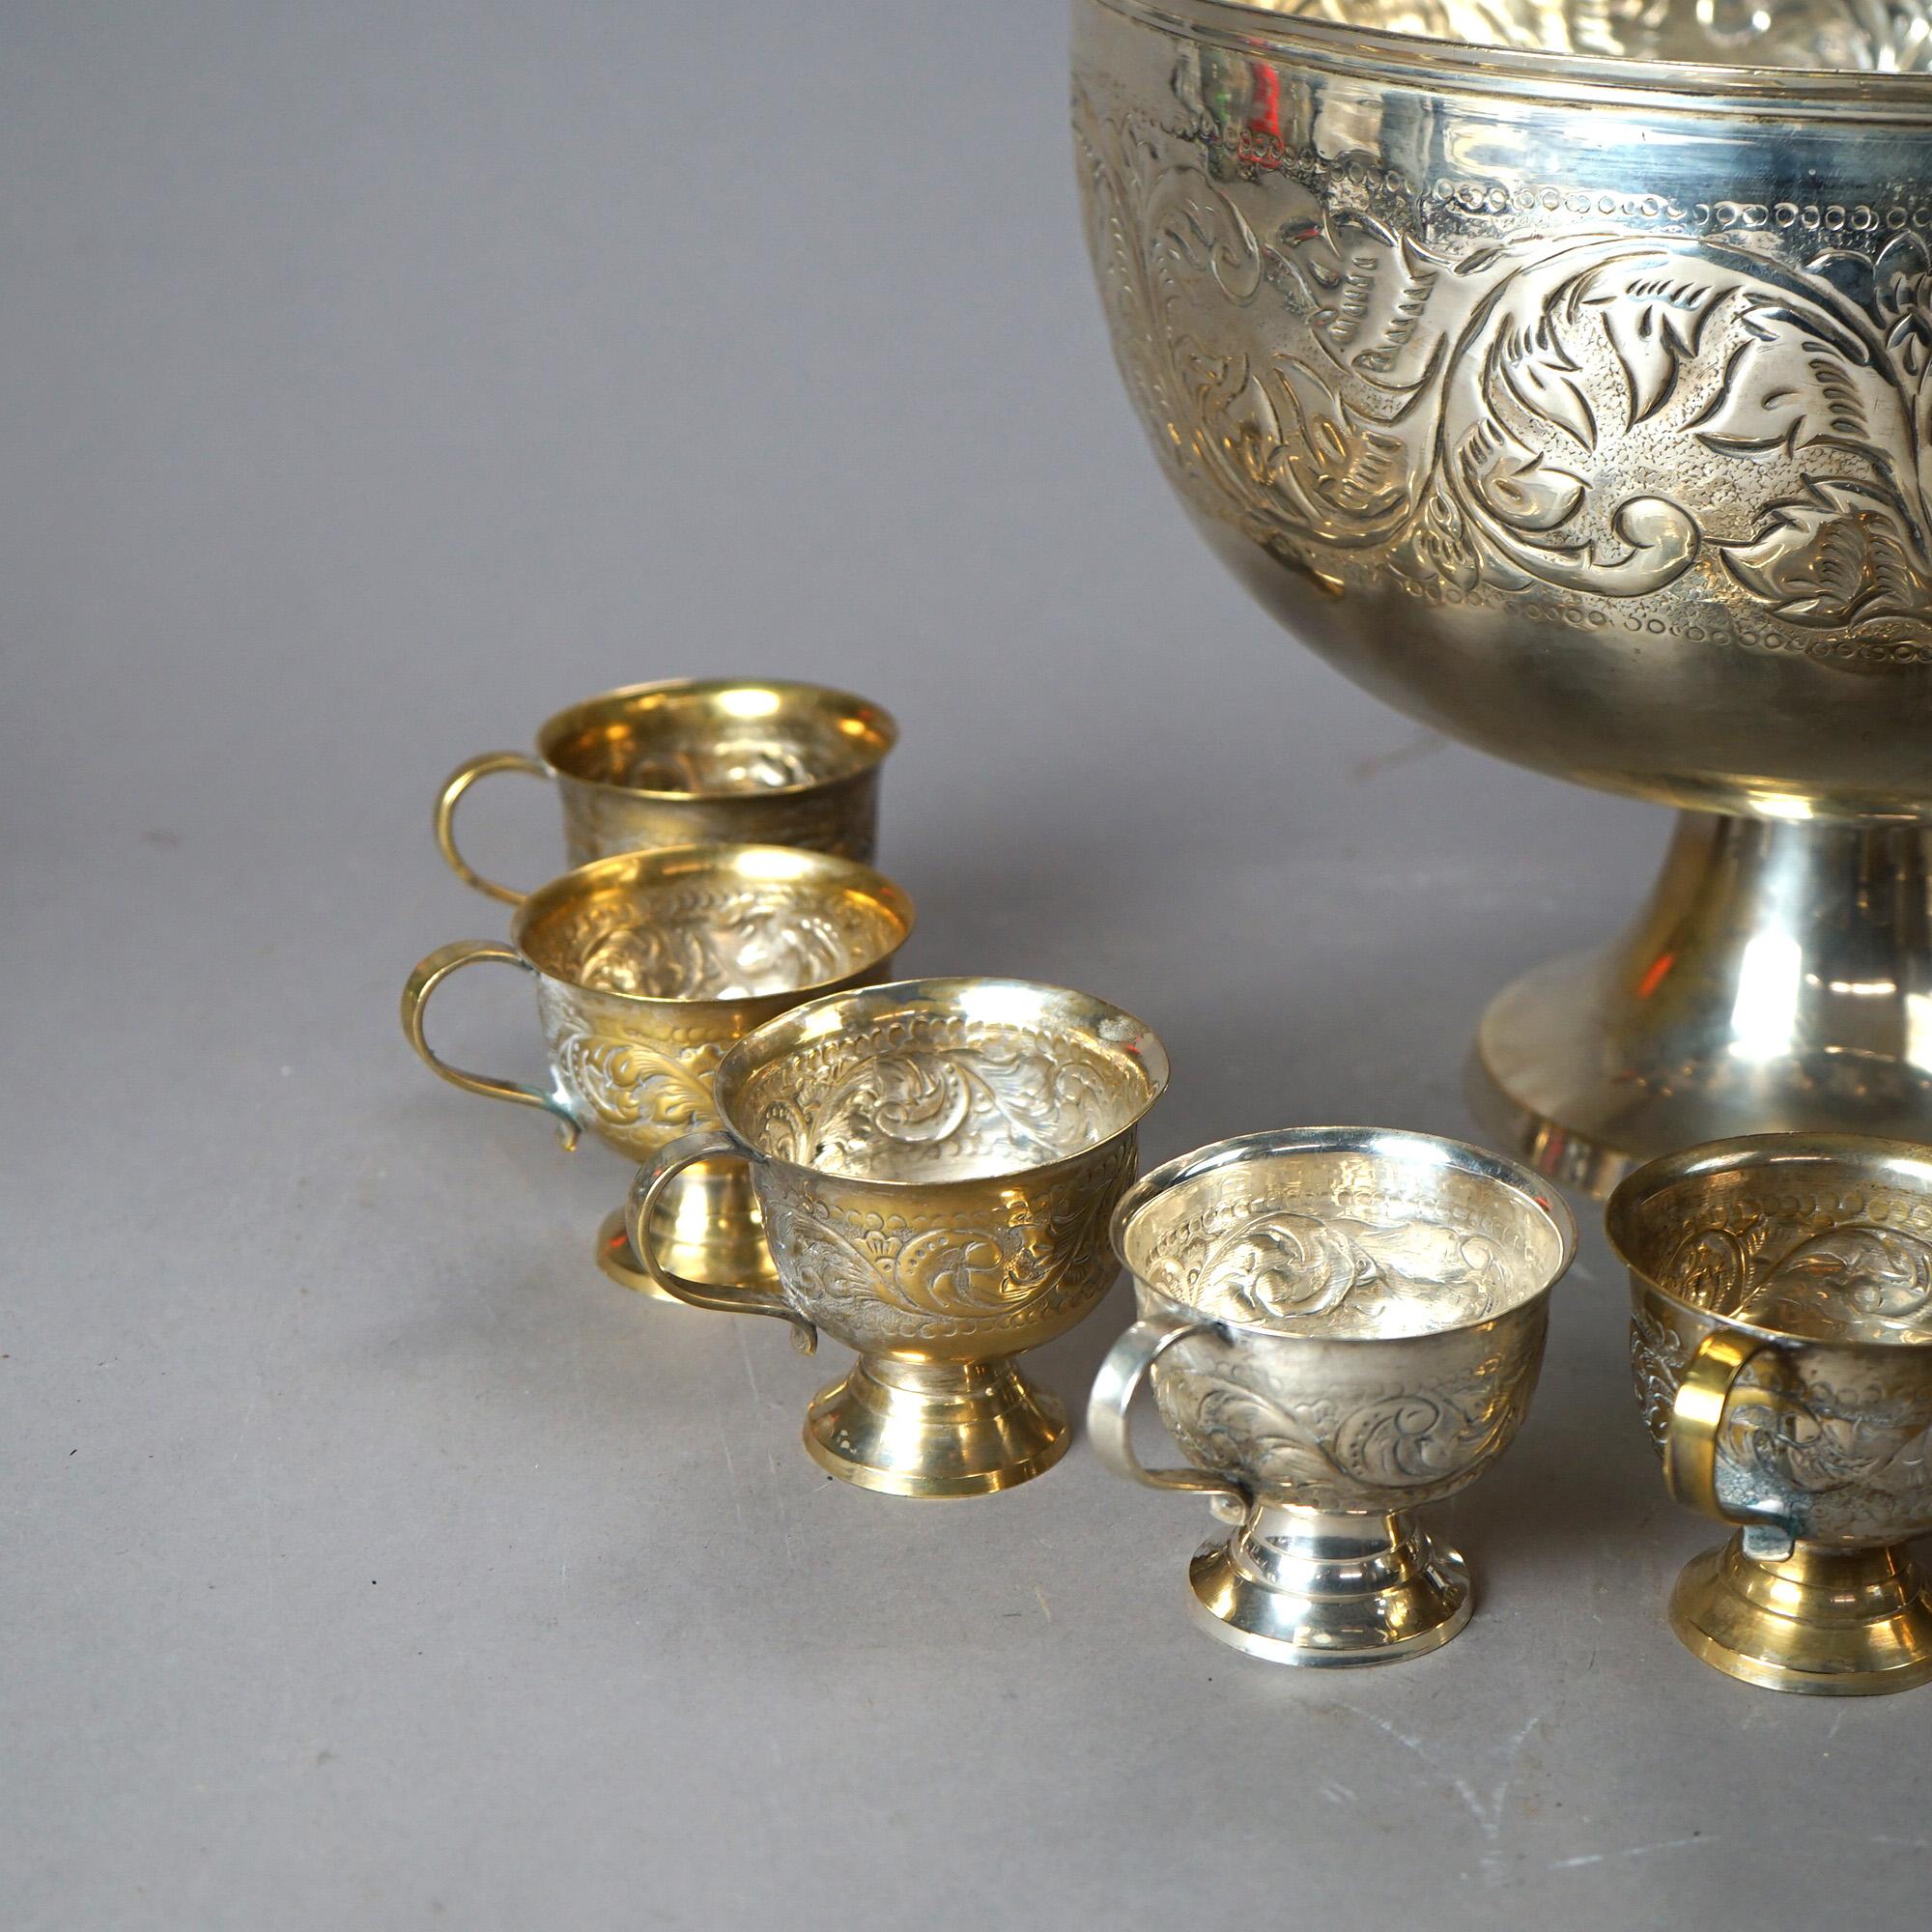 20th Century Silver Plate Foliate Embossed Punch Bowl Set with Ten Punch Cups & Ladle 20th C